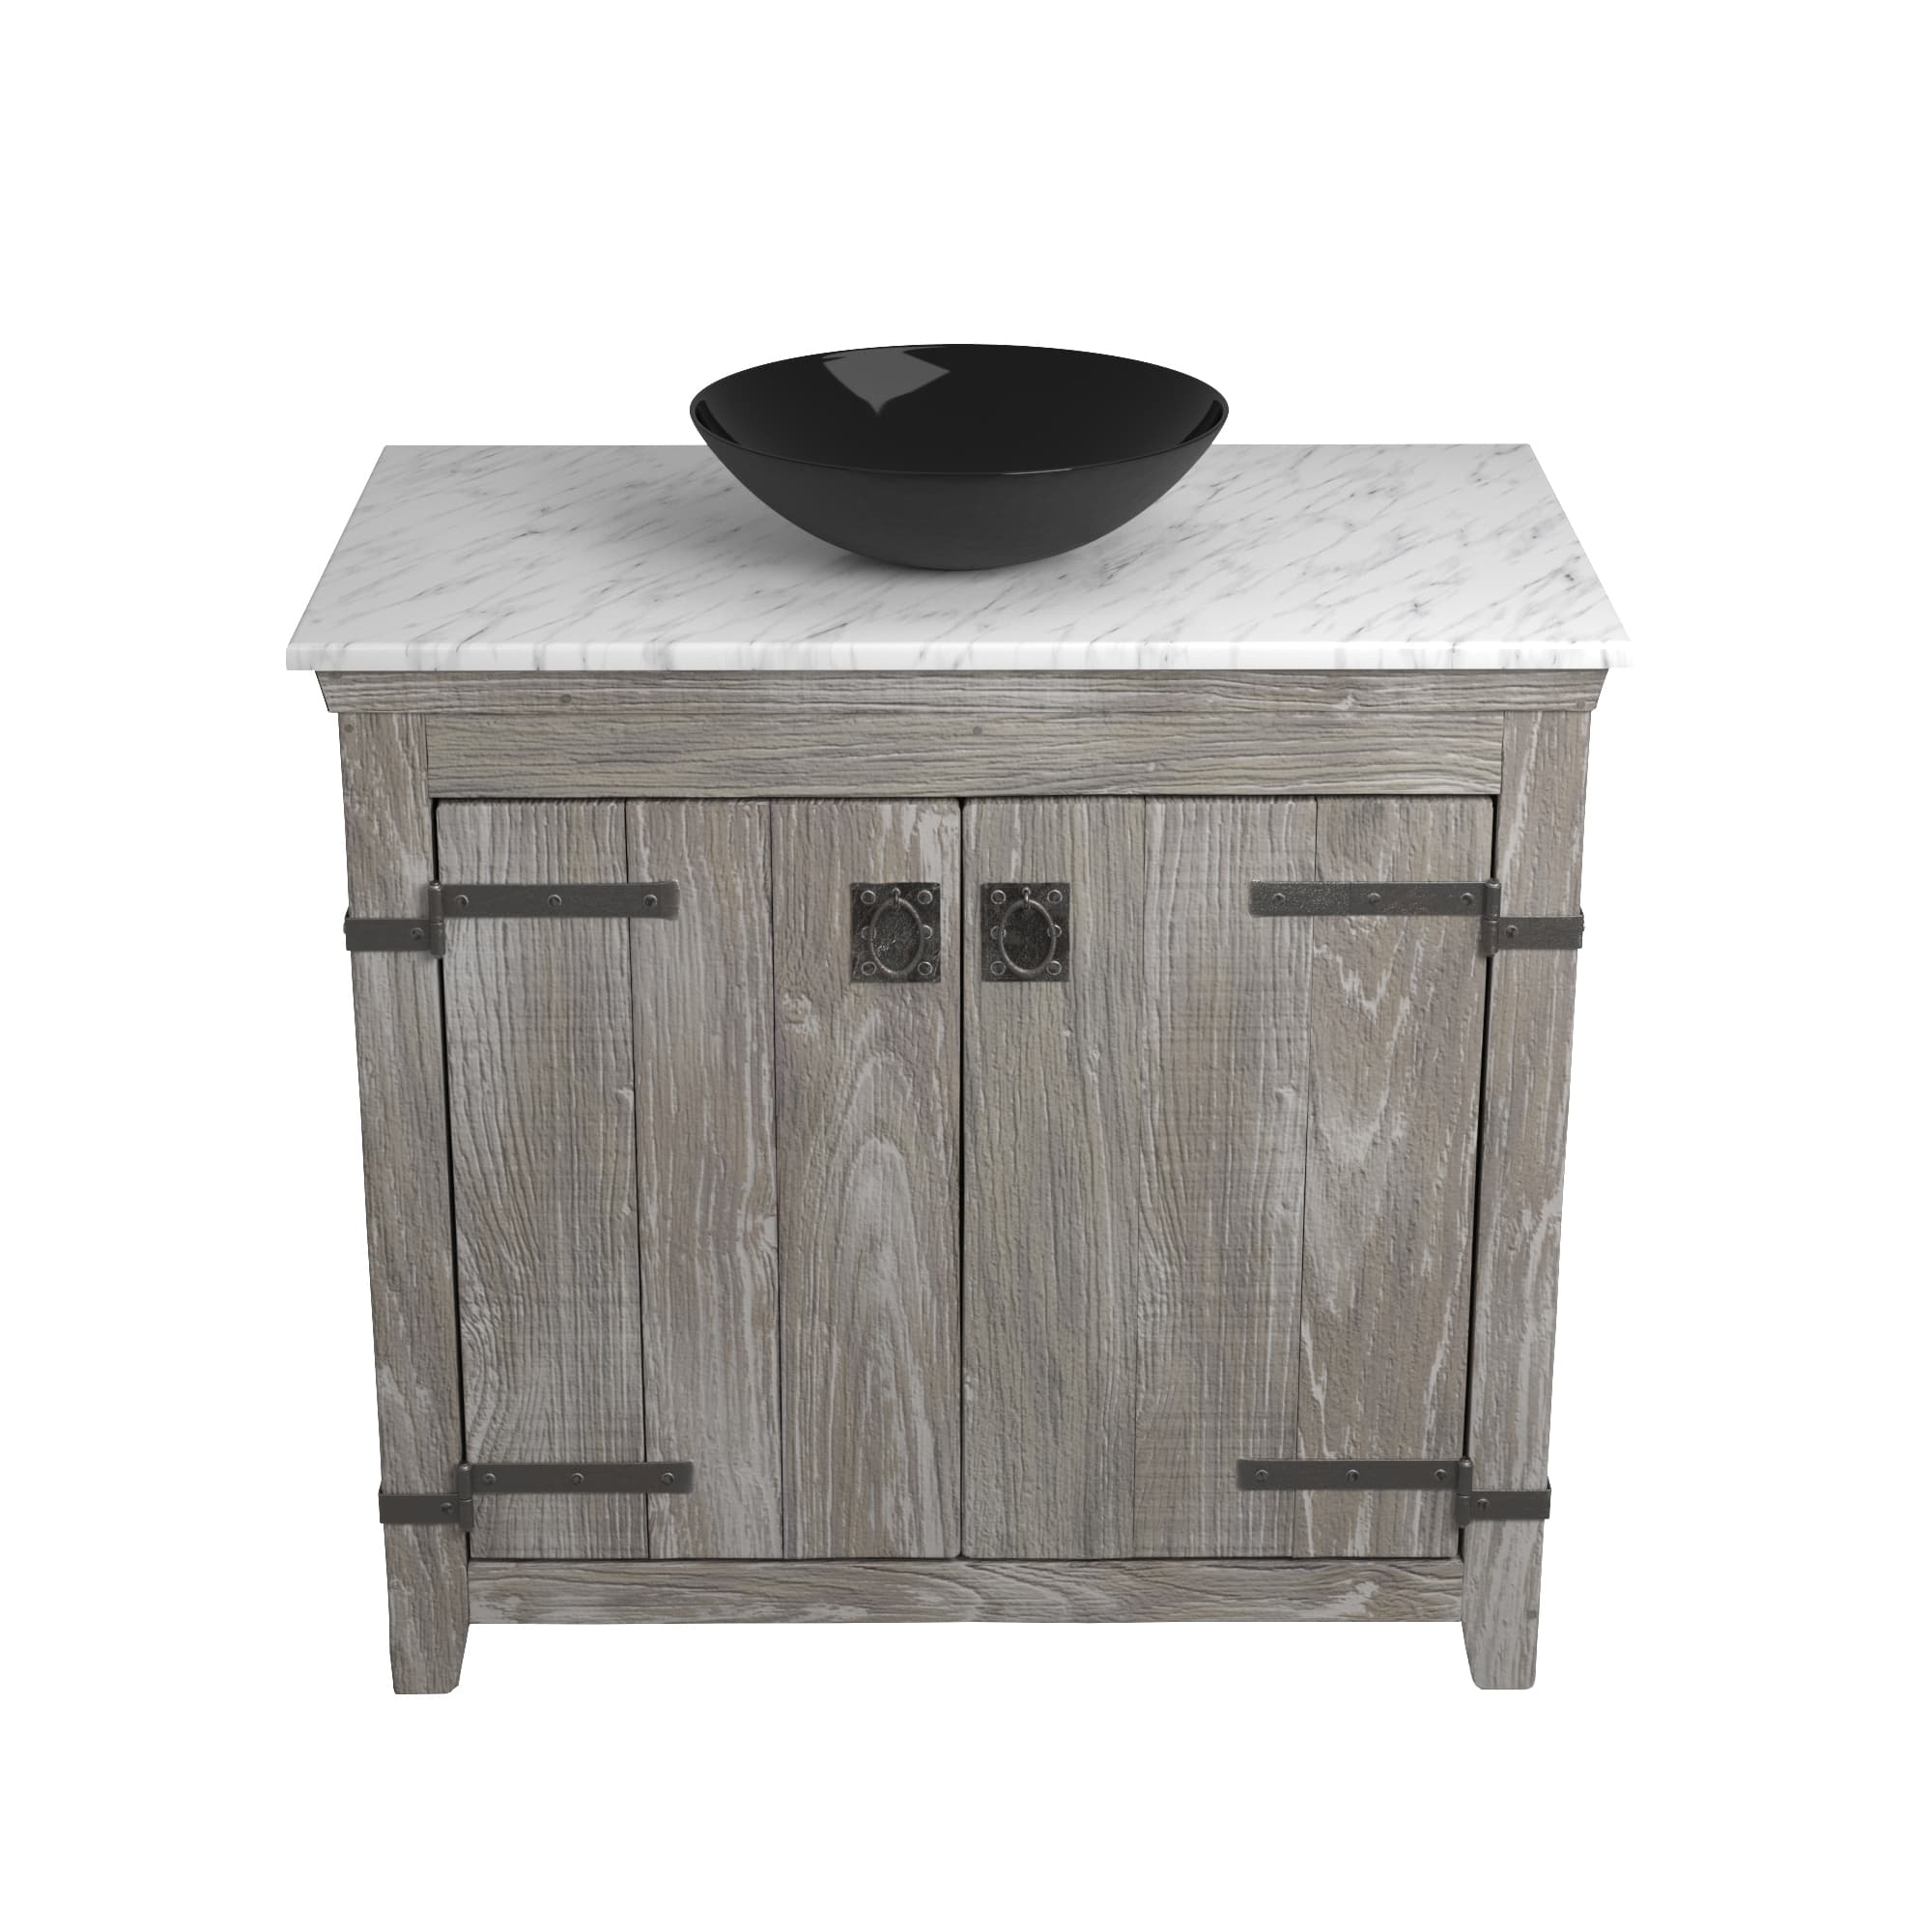 Native Trails 36" Americana Vanity in Driftwood with Carrara Marble Top and Verona in Abyss, No Faucet Hole, BND36-VB-CT-MG-072